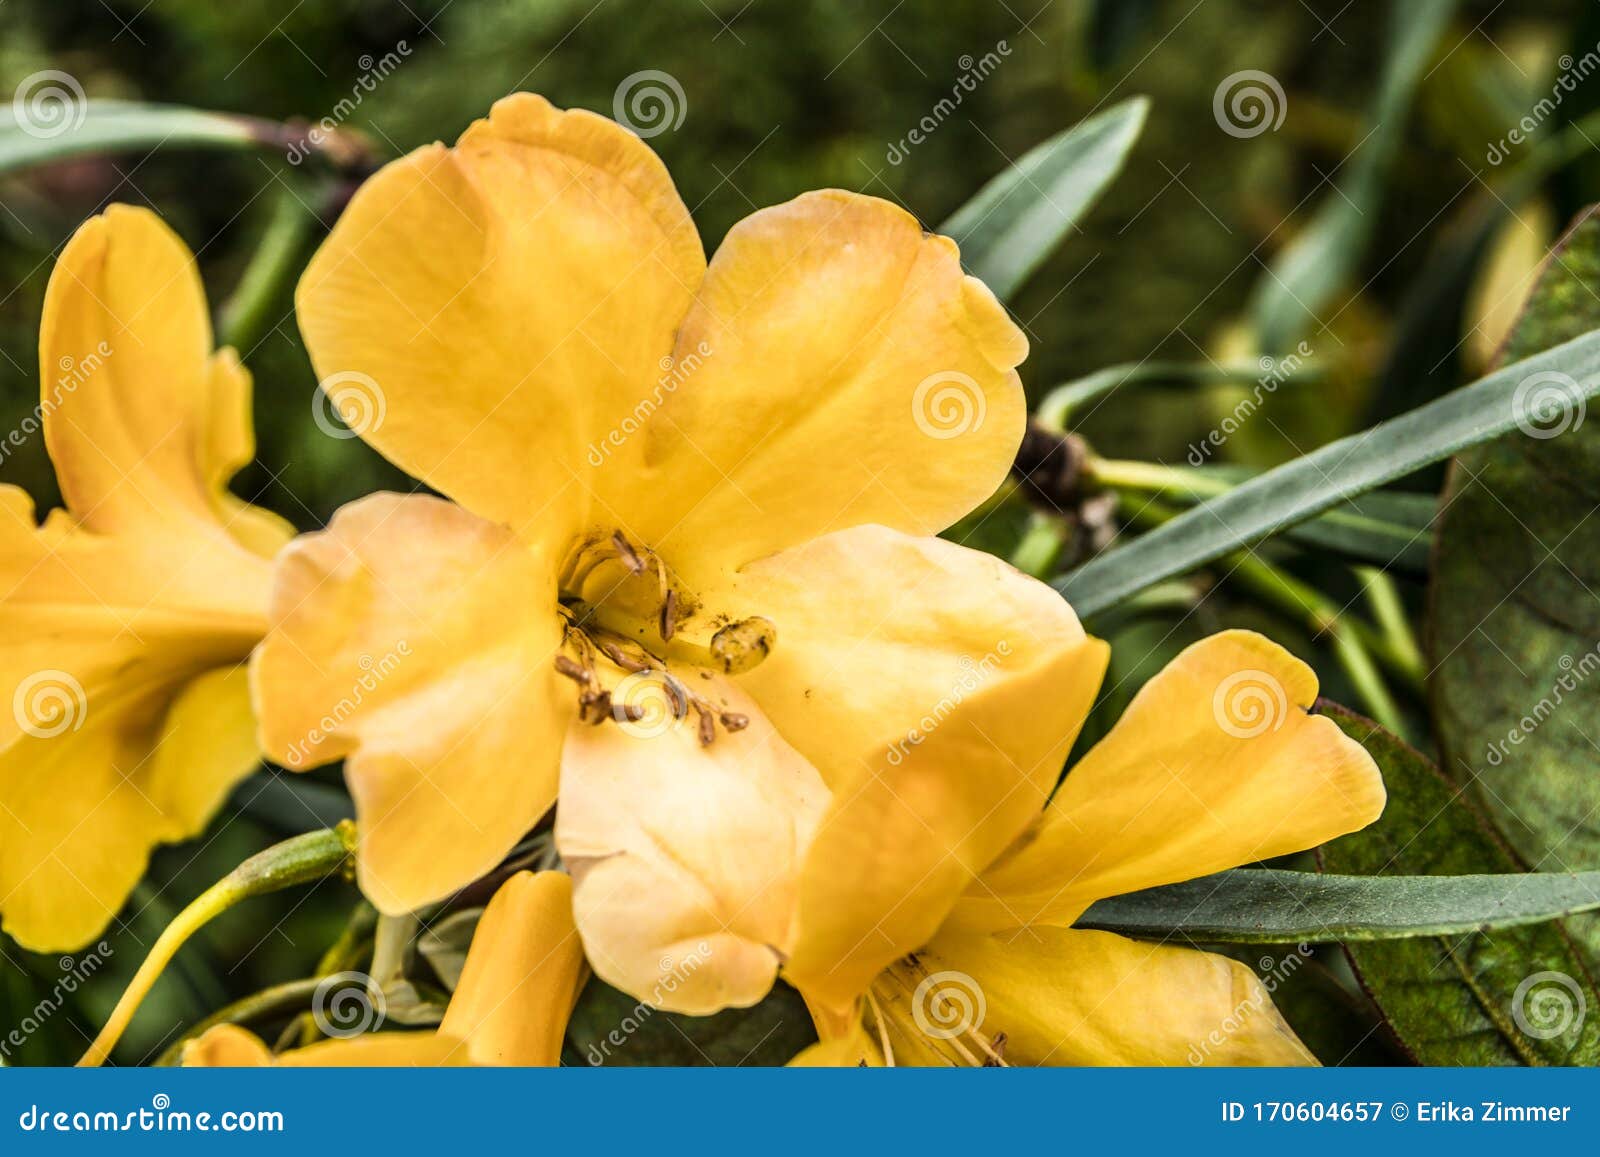 yellow flowers with five petals